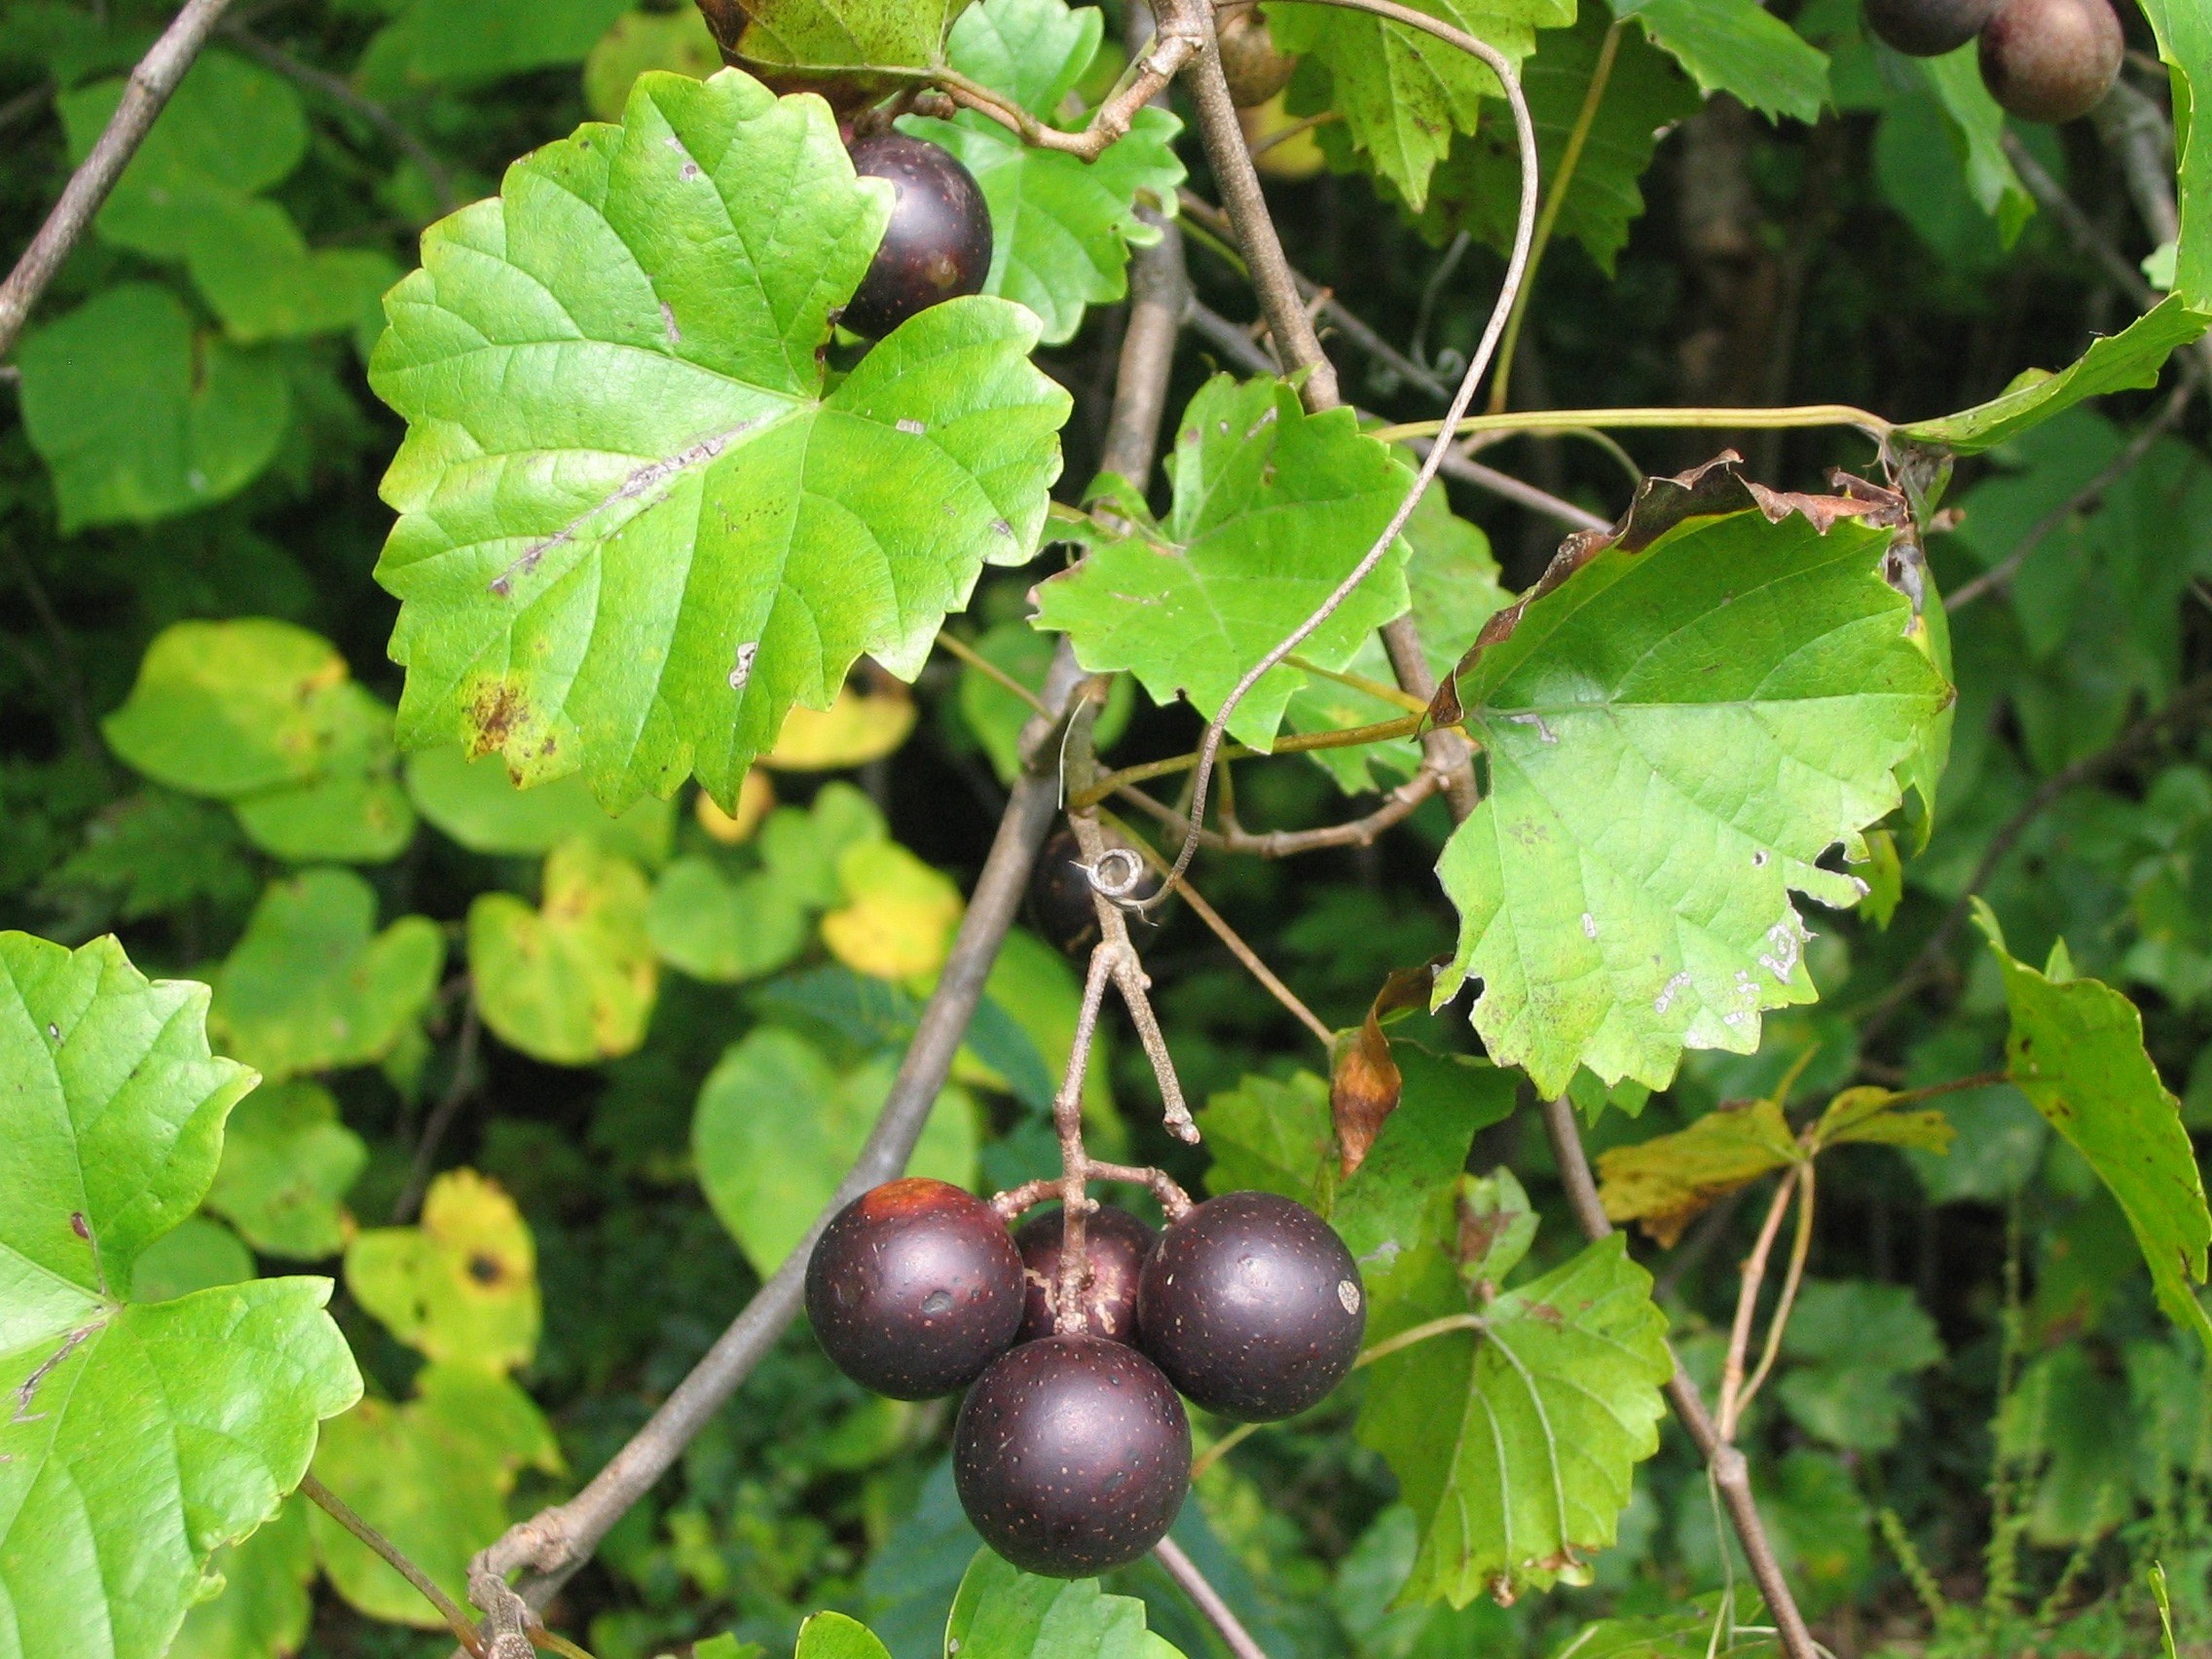 The Scientific Name is Muscadinia rotundifolia var. rotundifolia [= Vitis rotundifolia]. You will likely hear them called Muscadine, Scuppernong. This picture shows the Small un-lobed heart-shaped leaves with serrated margins, large fruit. of Muscadinia rotundifolia var. rotundifolia [= Vitis rotundifolia]